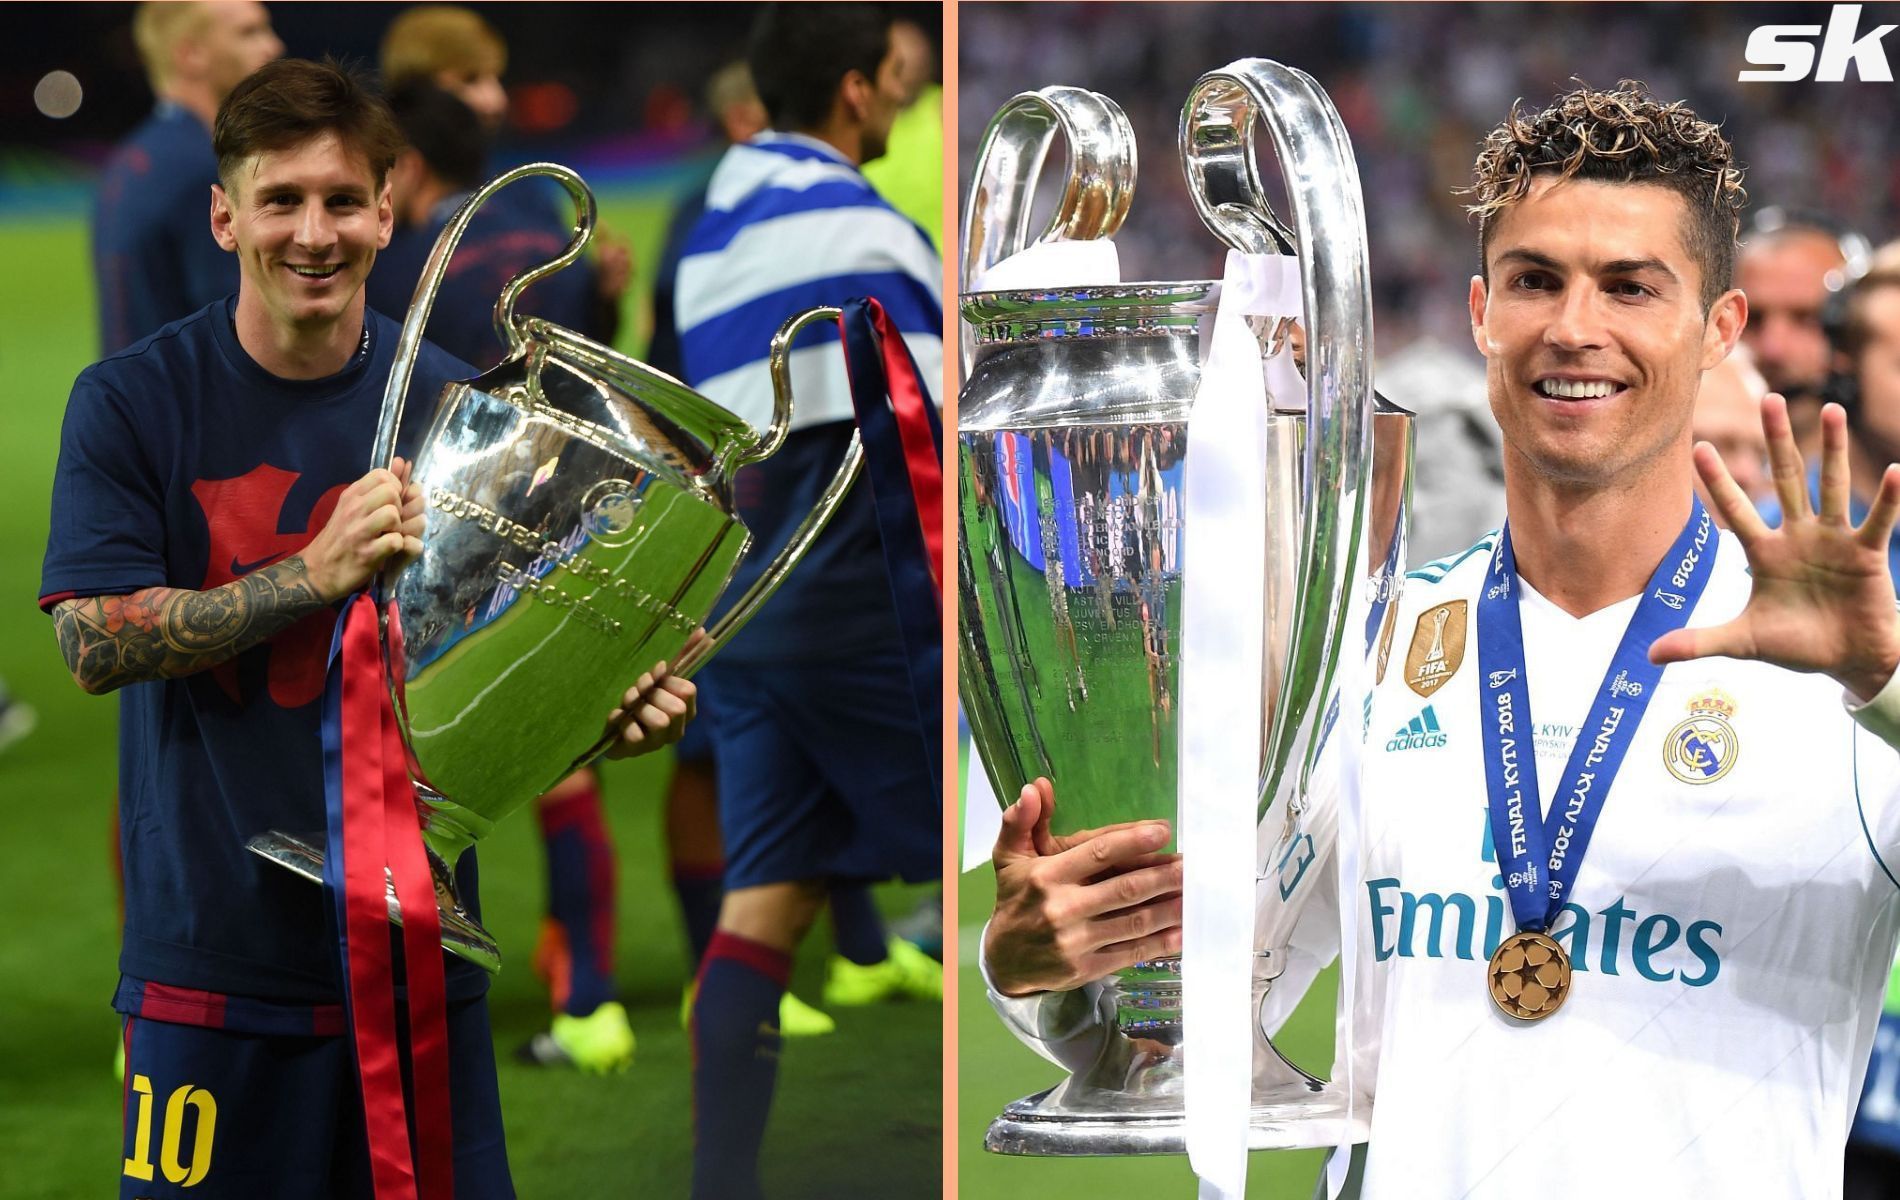 Some of the top Champions League winners are record national goal-scorers